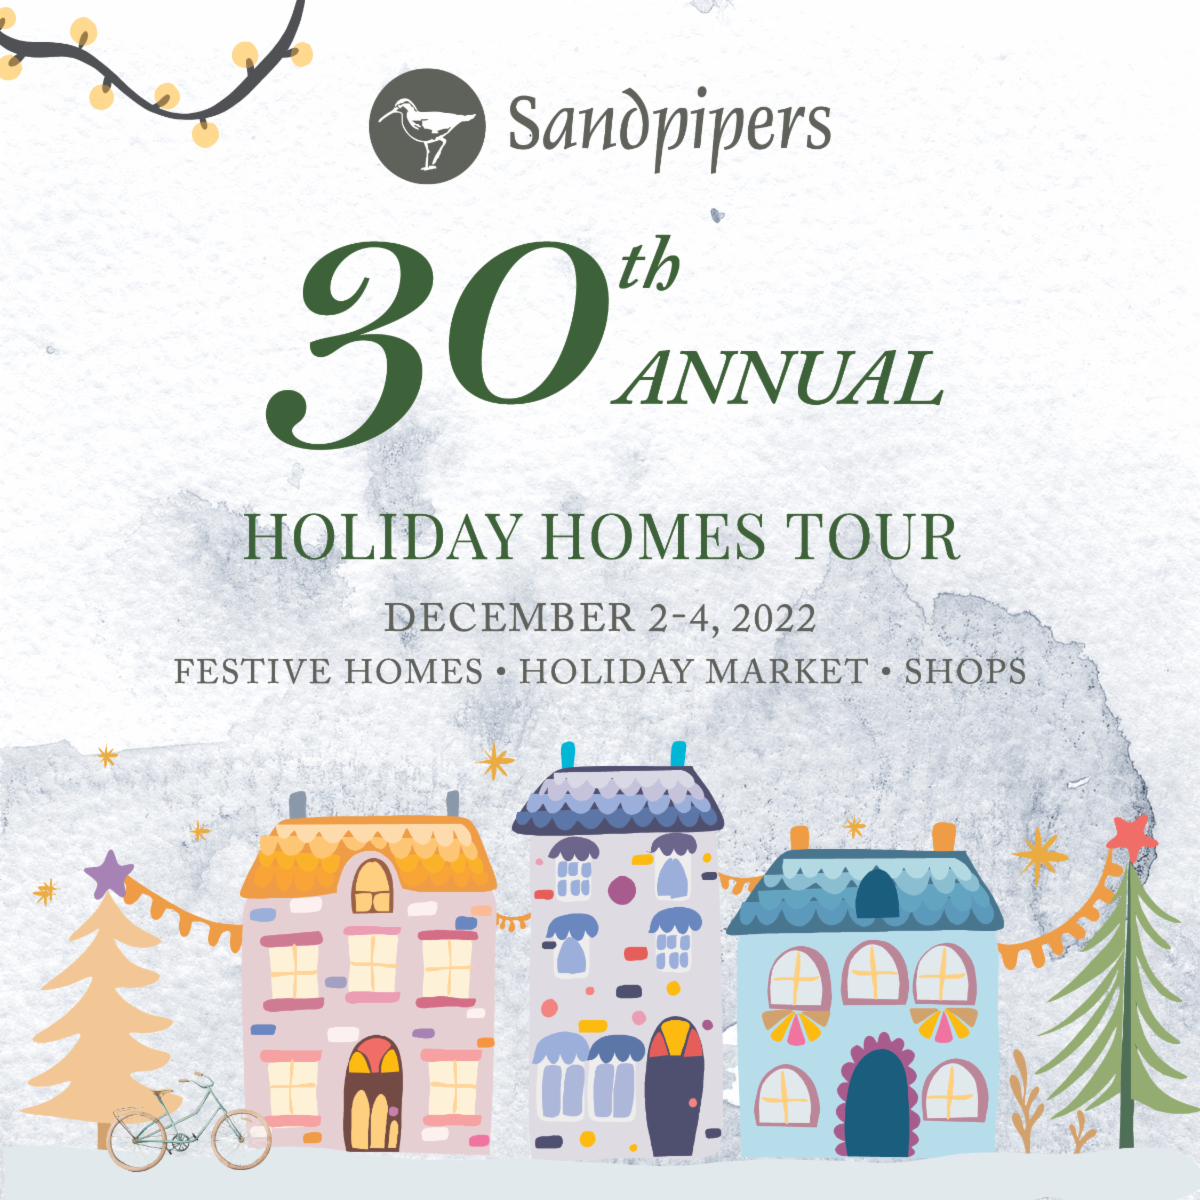 Sandpipers' Annual Holiday Homes Tour